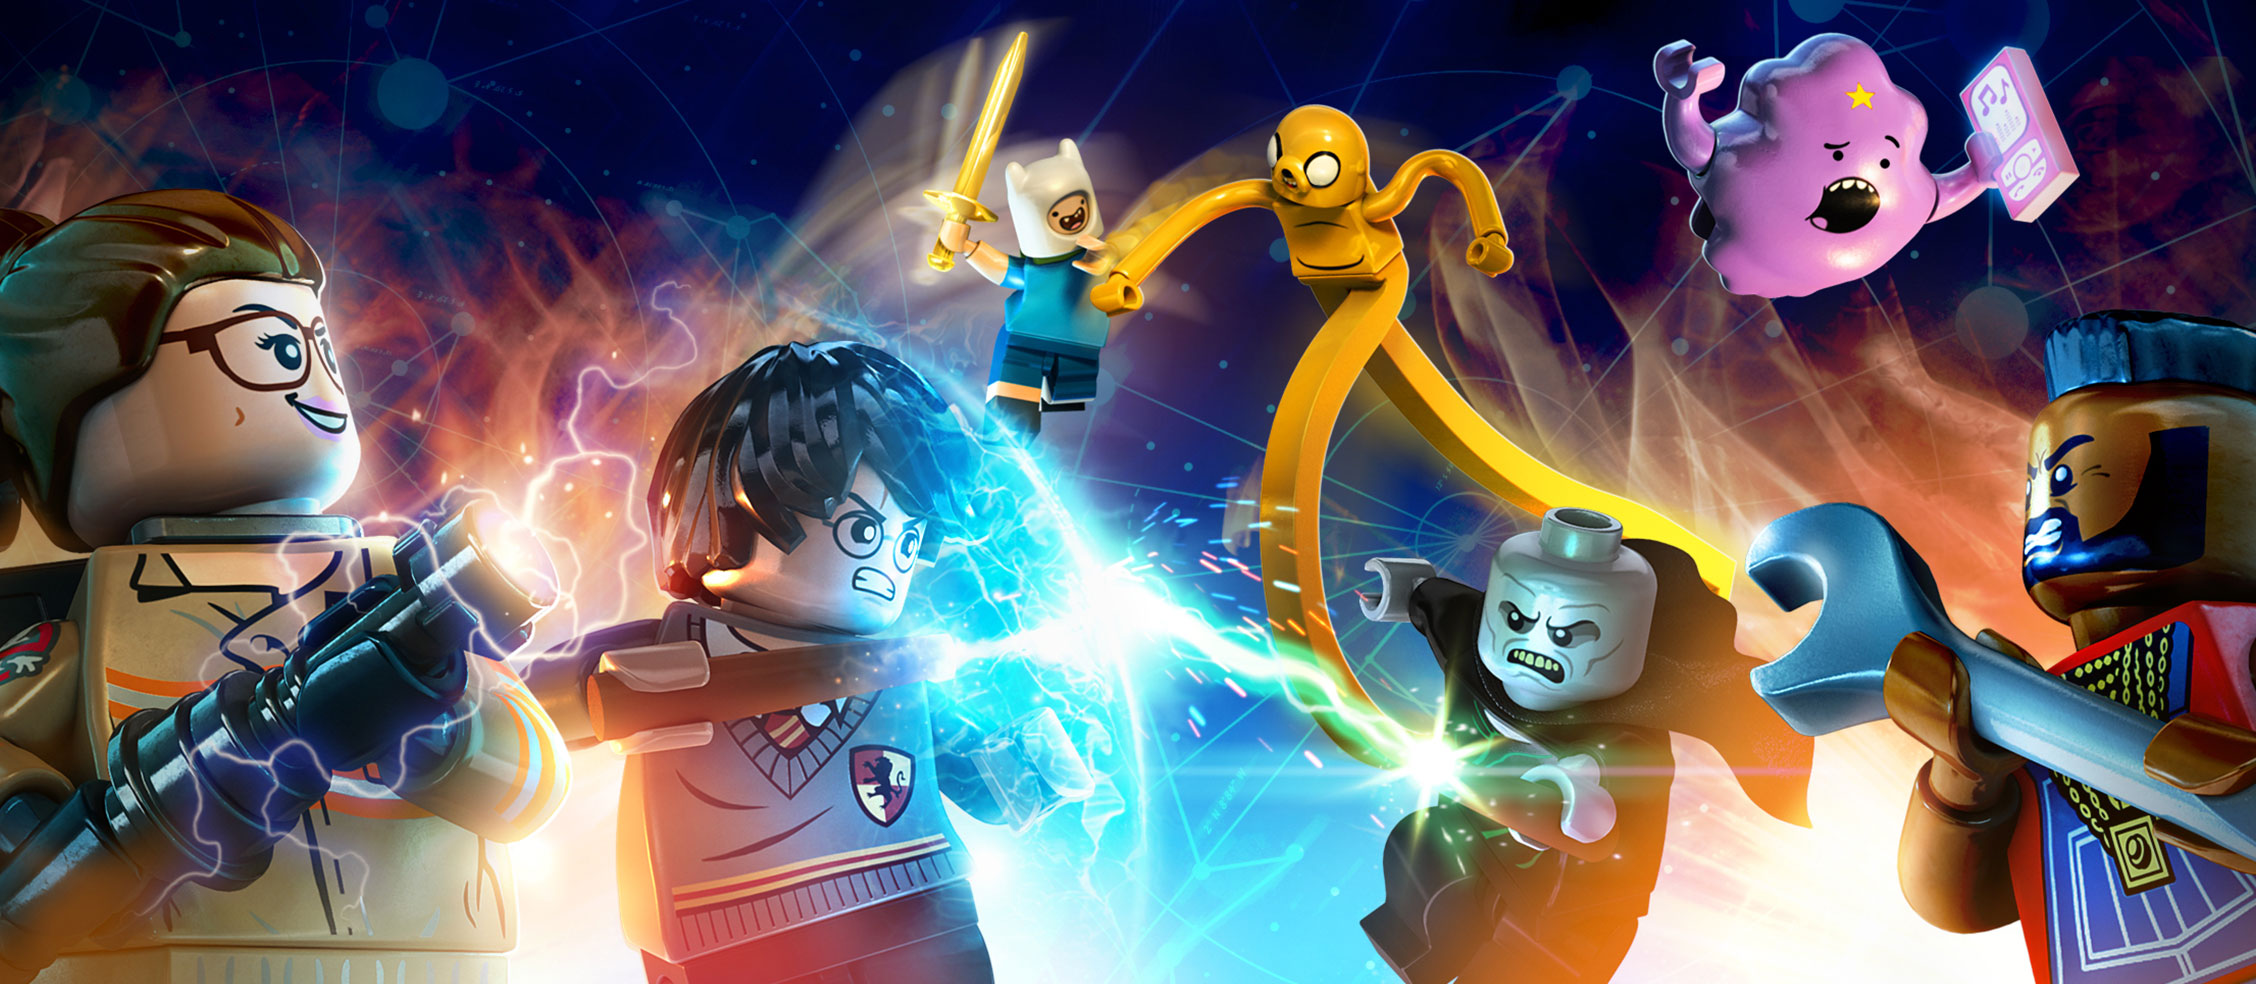 Harry Potter' and 'E.T.' Added to 'Lego Dimensions' Game – The